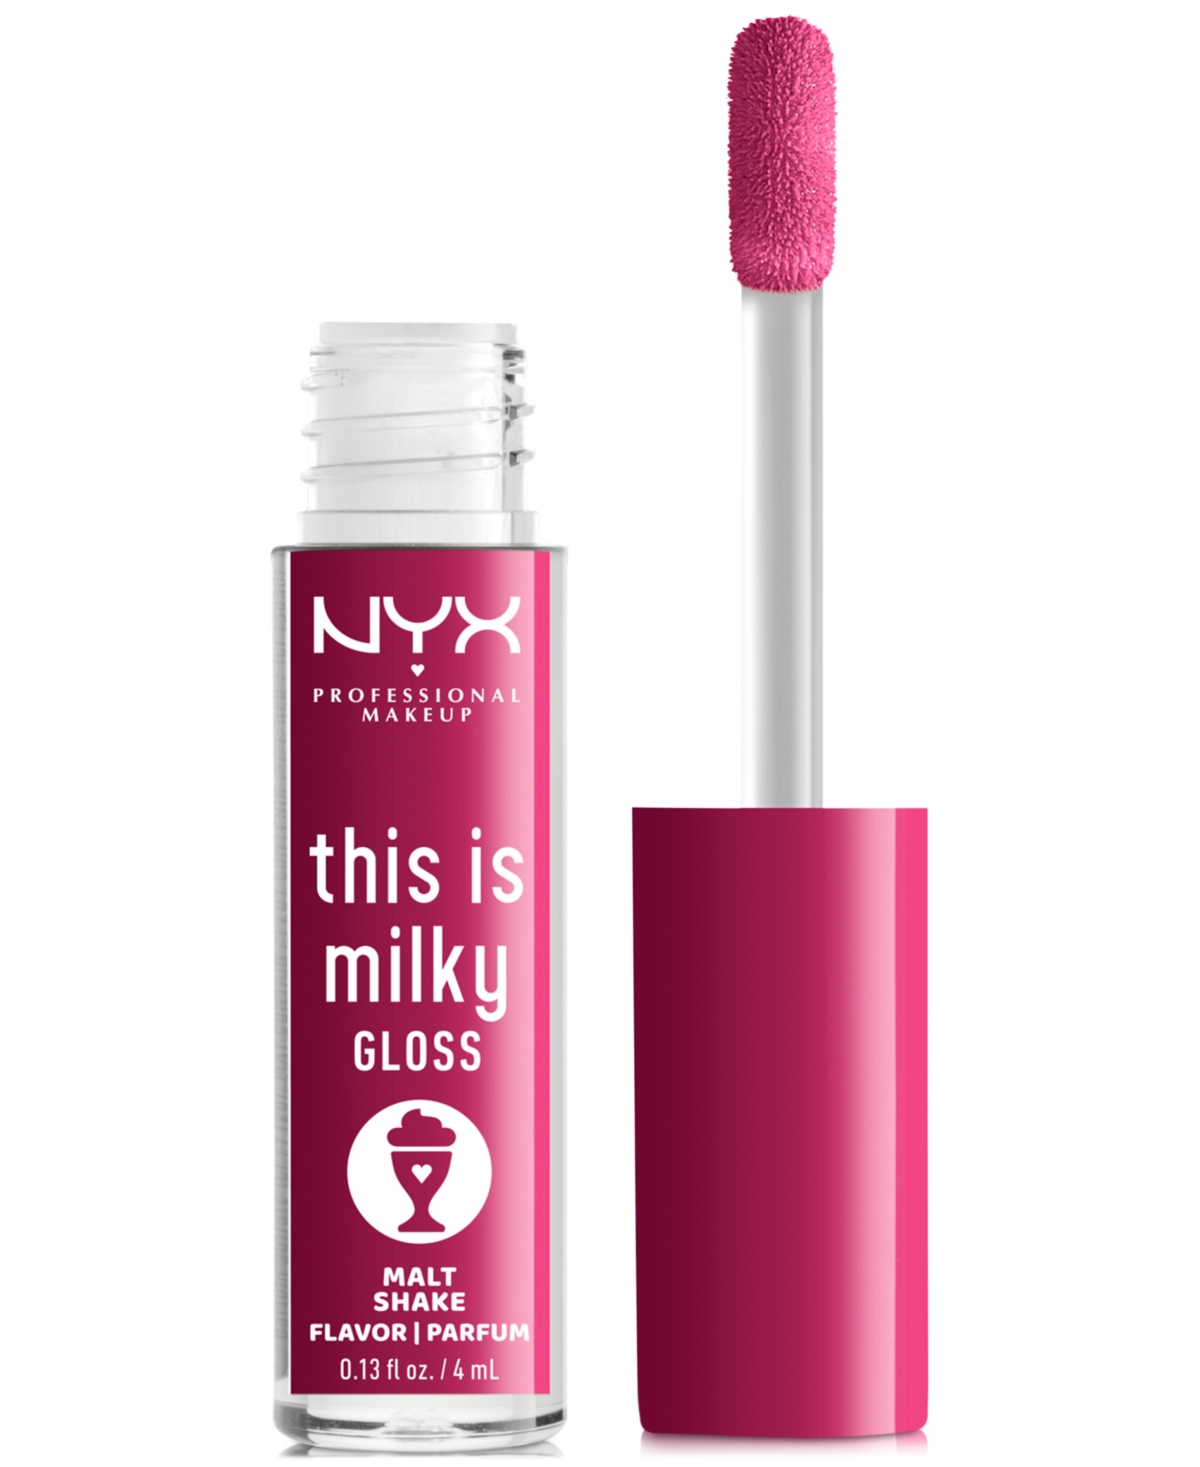 Nyx Professional Makeup This Is Milky Gloss In Malt Shake